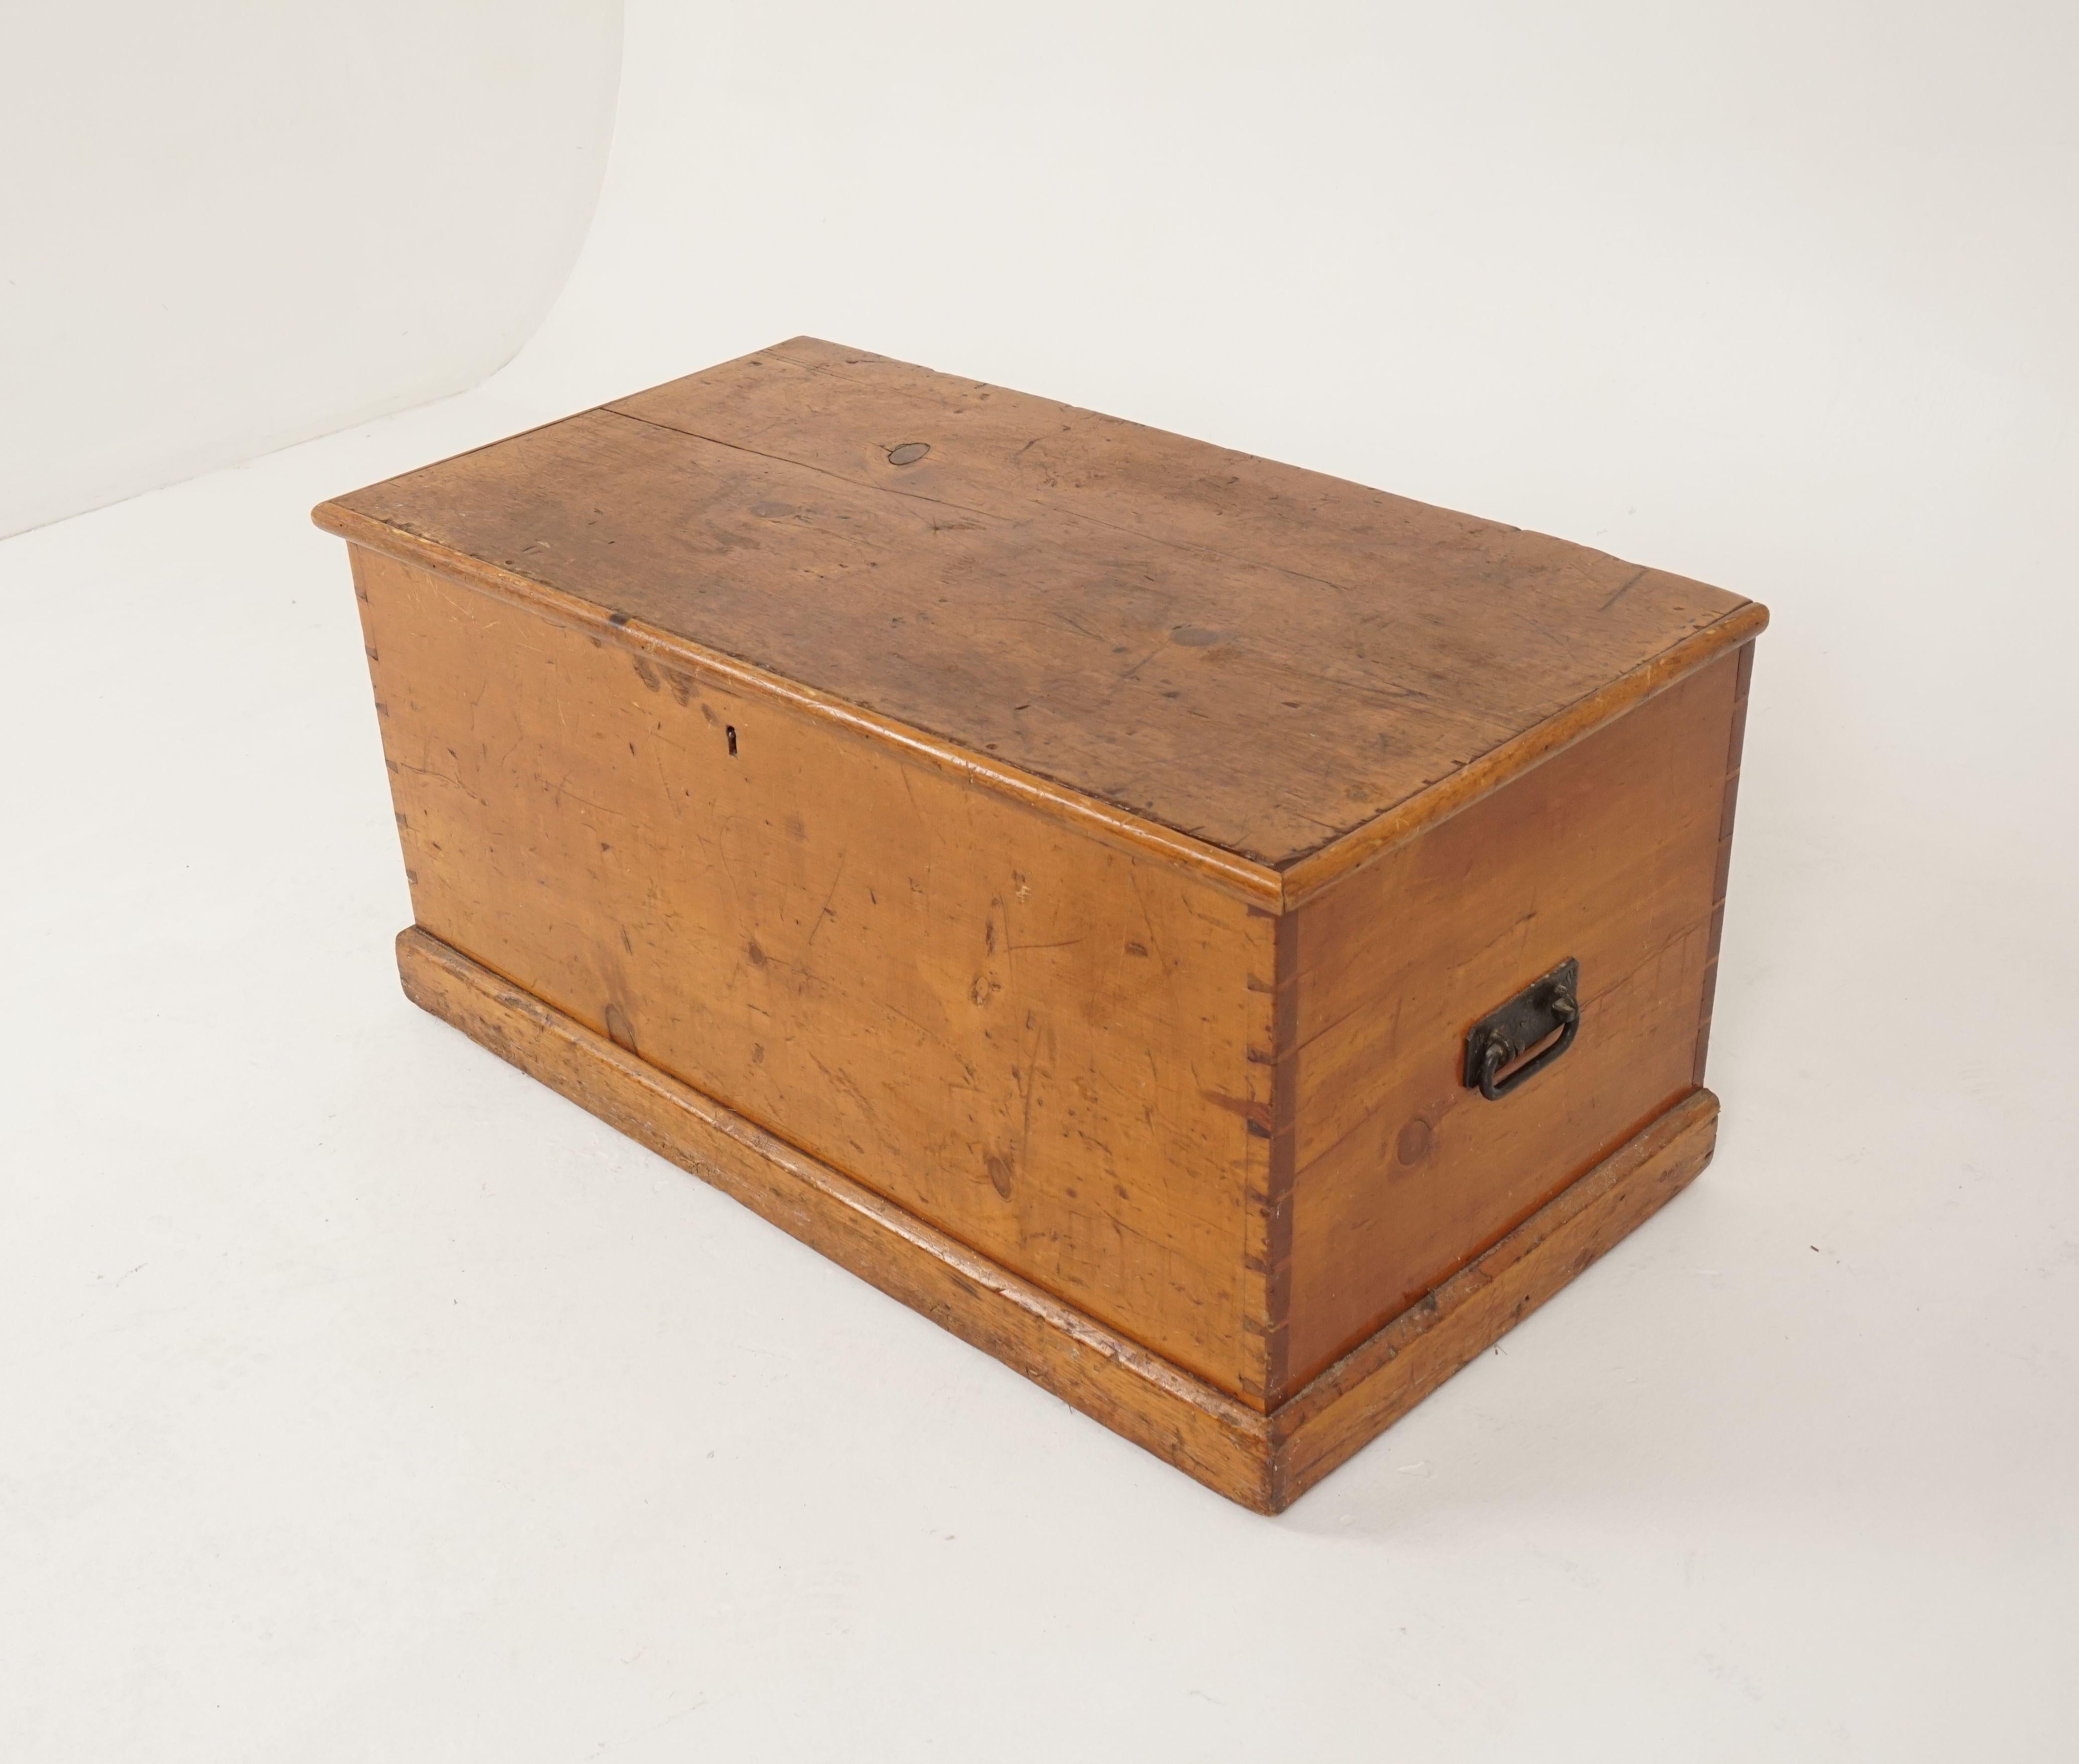 Antique pine blanket box, toybox, coffee table, dovetailed, Scotland 1890, B2308

Scotland, 1890
Solid pine
Original finish
Rectangular top with 1 plank
Moulded edge
Lift up top reveals original hinges
To the left is a lift up drawer for